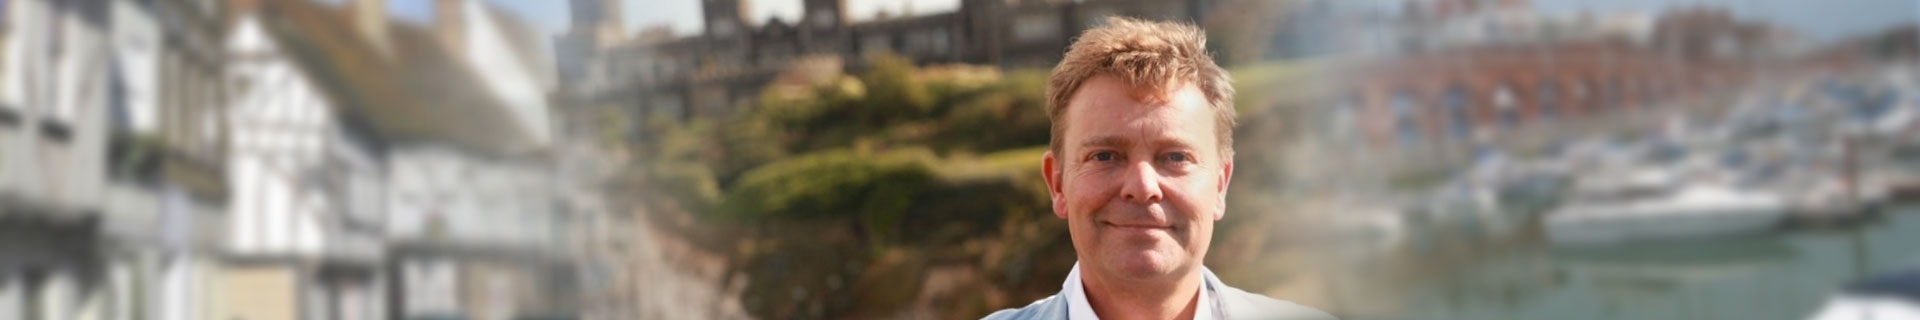 Banner image for Craig Mackinlay MP